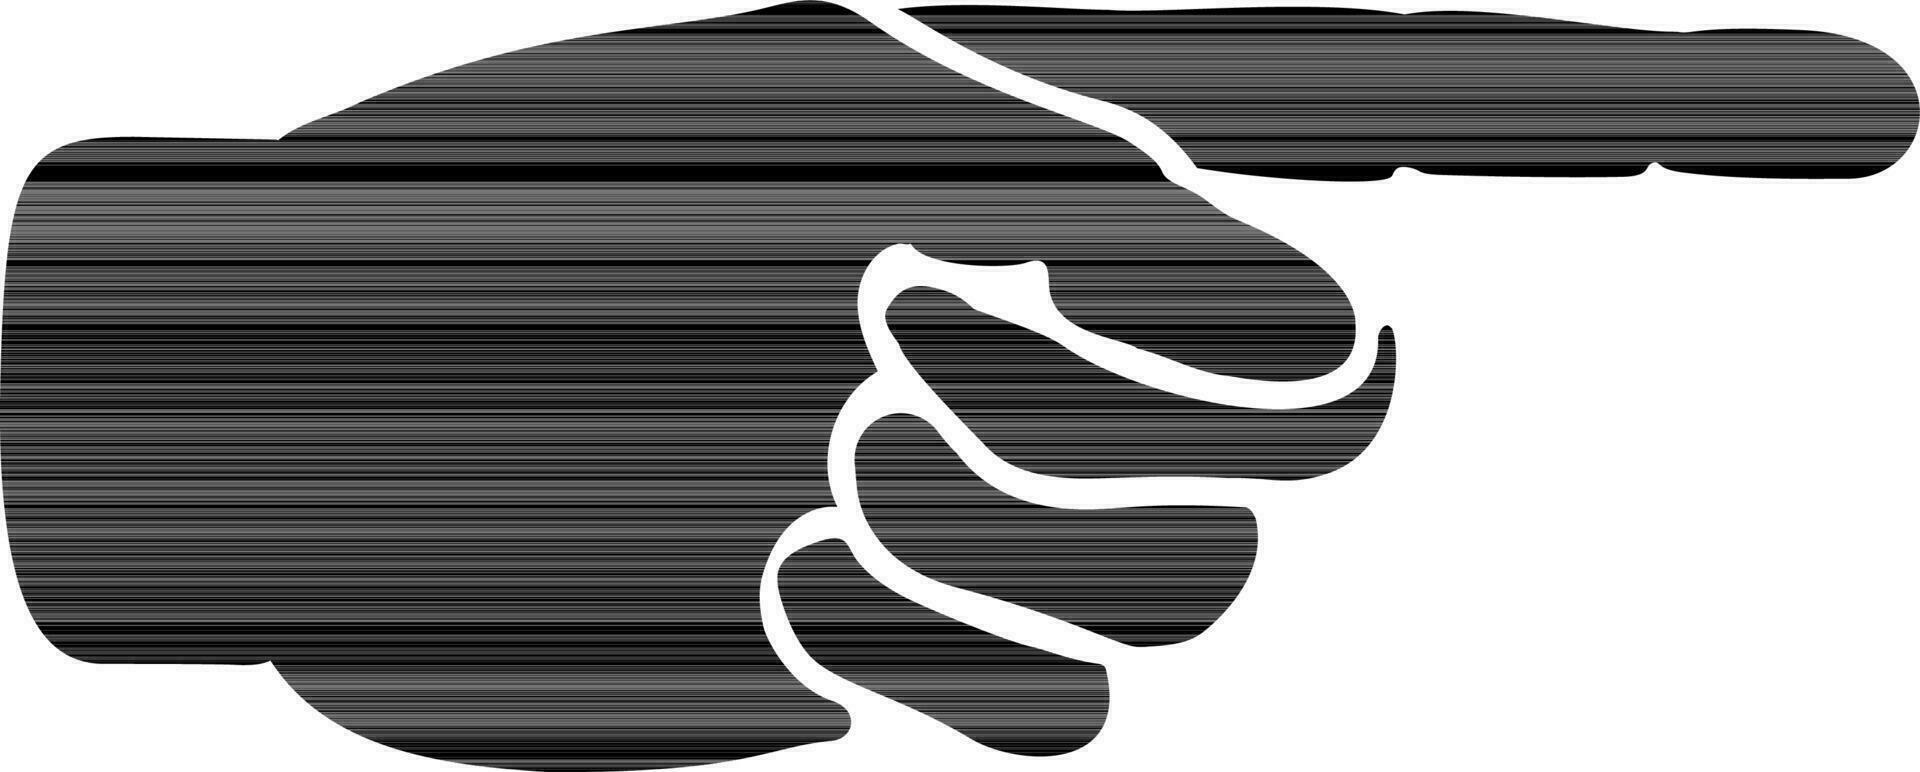 black and white icon of pointing finger in flat style. vector